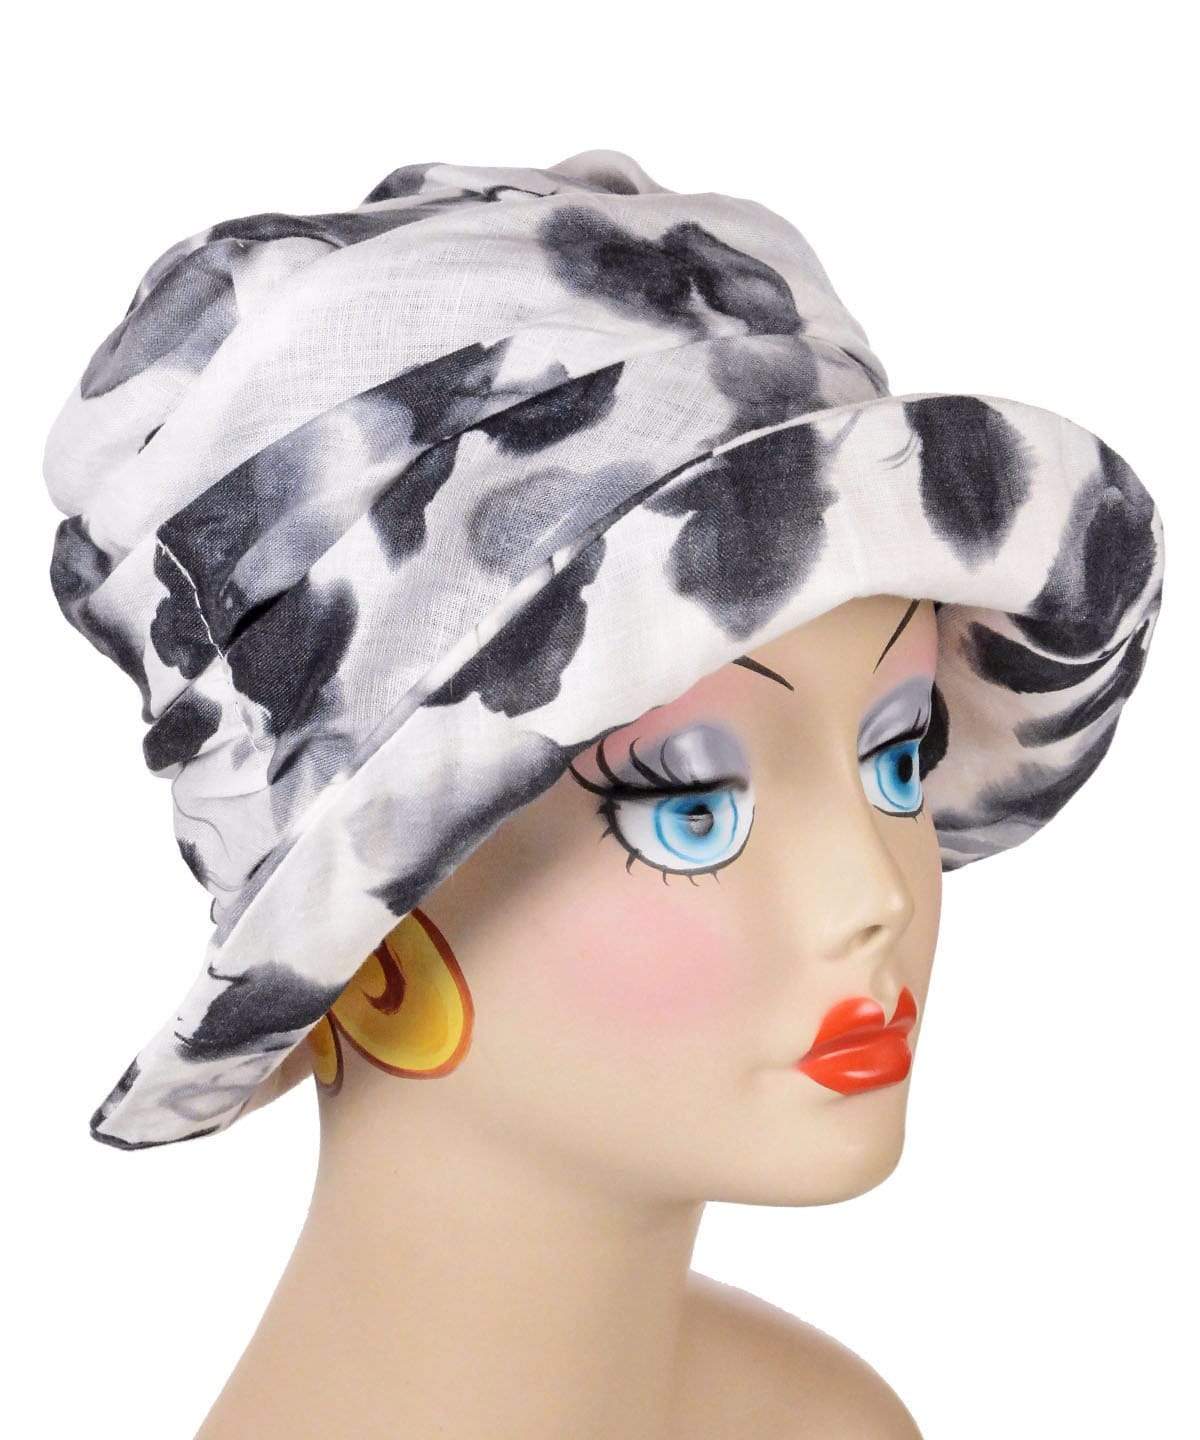 Krystyne Bucket Hat in Black and White Floral Linen Handmade in Seattle WA by Pandemonium Millinery USA